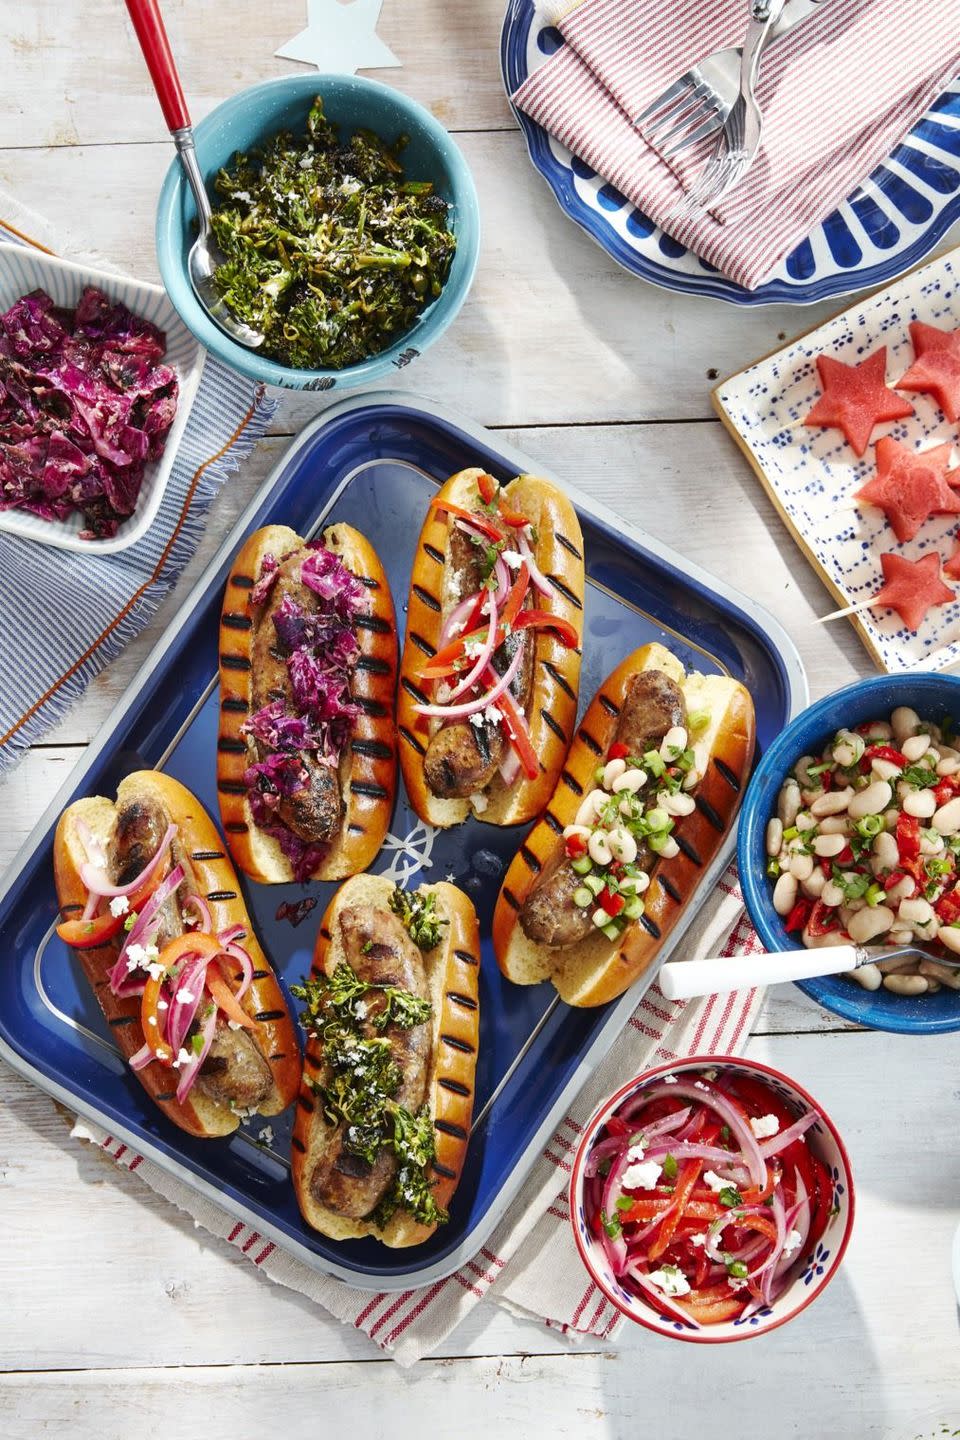 grilled sausages in grilled buns with various toppings on a dark blue serving tray